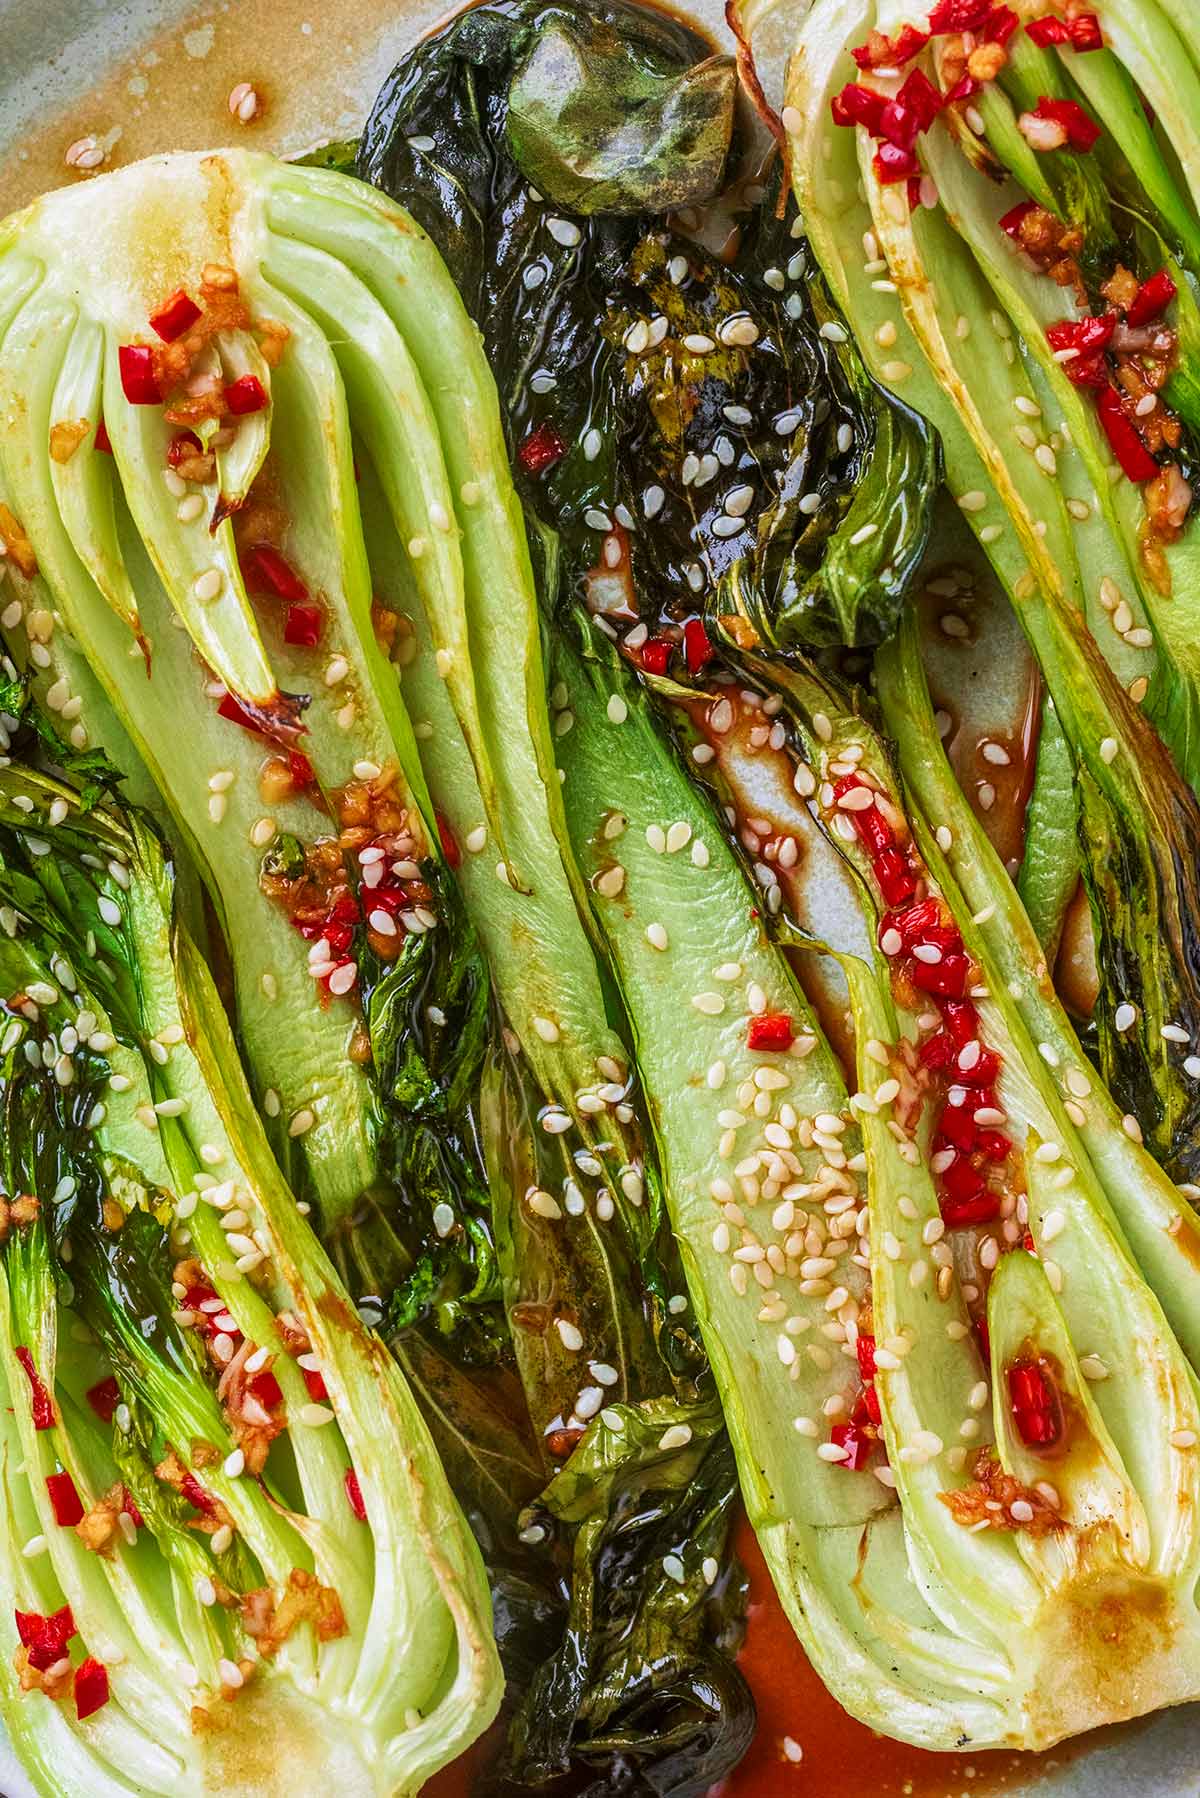 Roasted pak choi topped with chopped red chilli and sesame seeds.